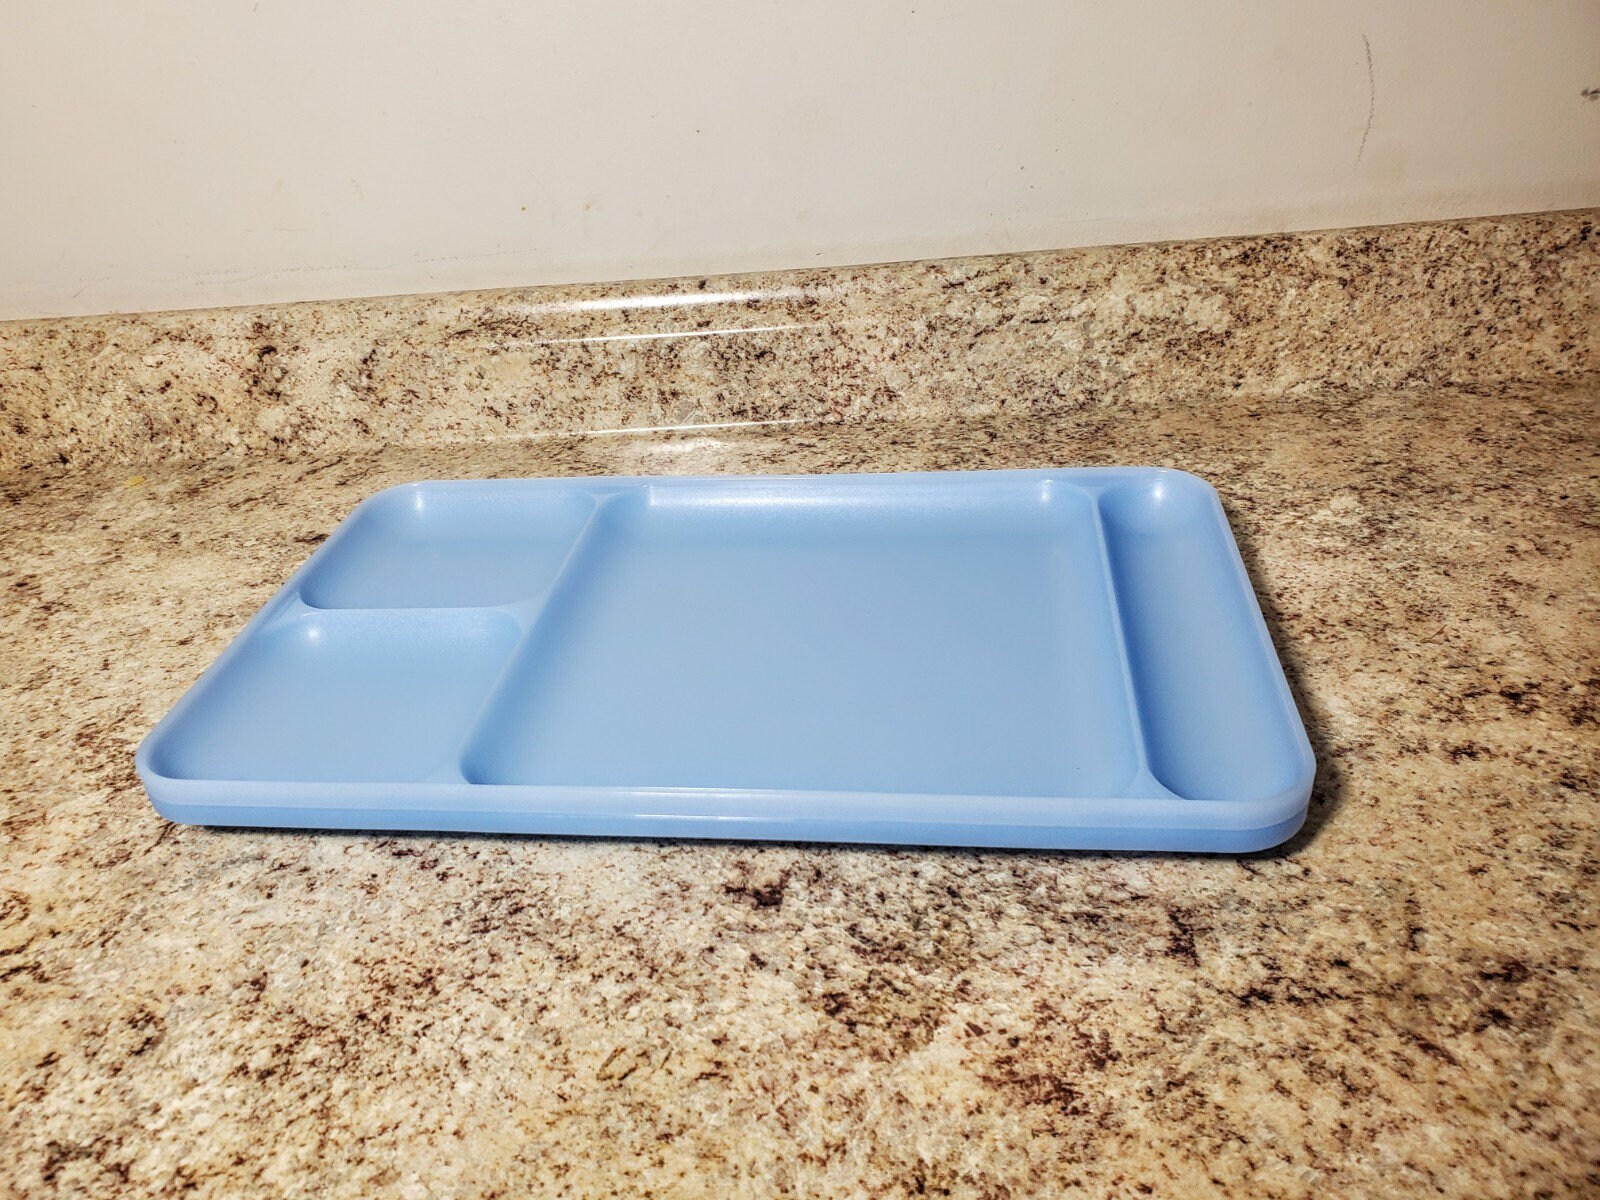 Tupperware Divided Trays Picnic Camping Daycare Toddler Plate Blue 1535 Set  of 4